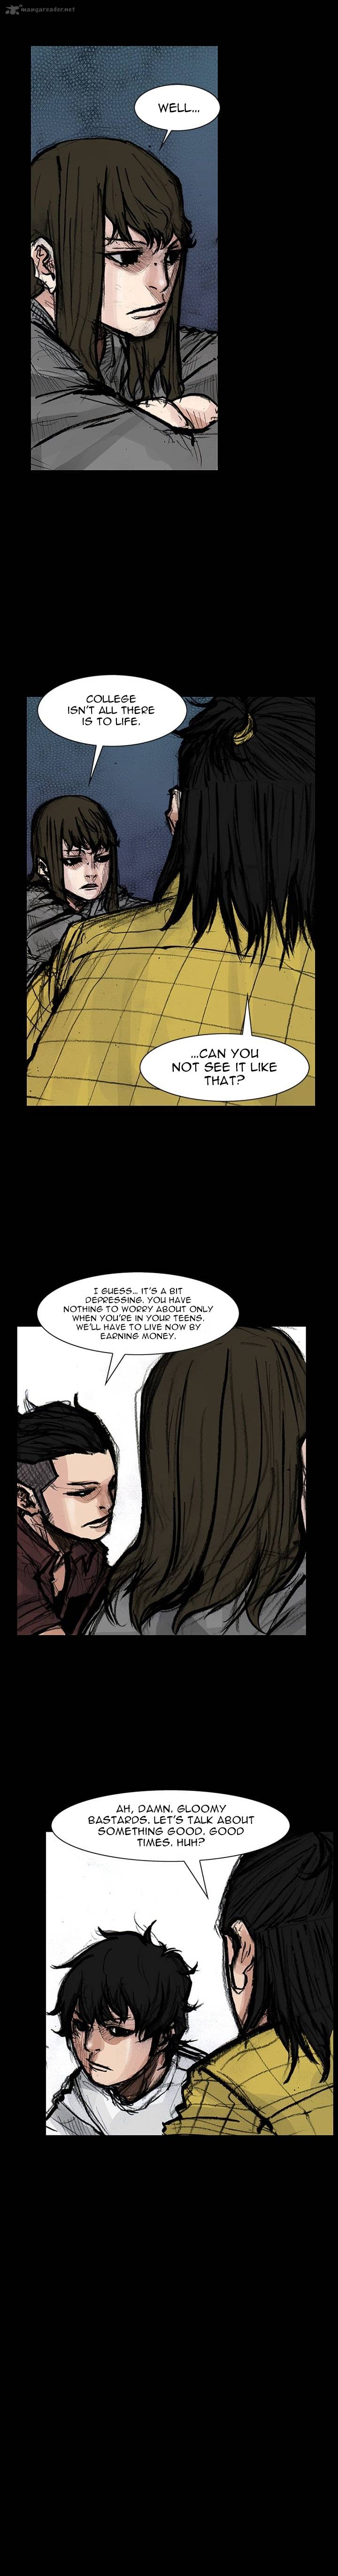 Dokgo 2 Chapter 2 Page 8